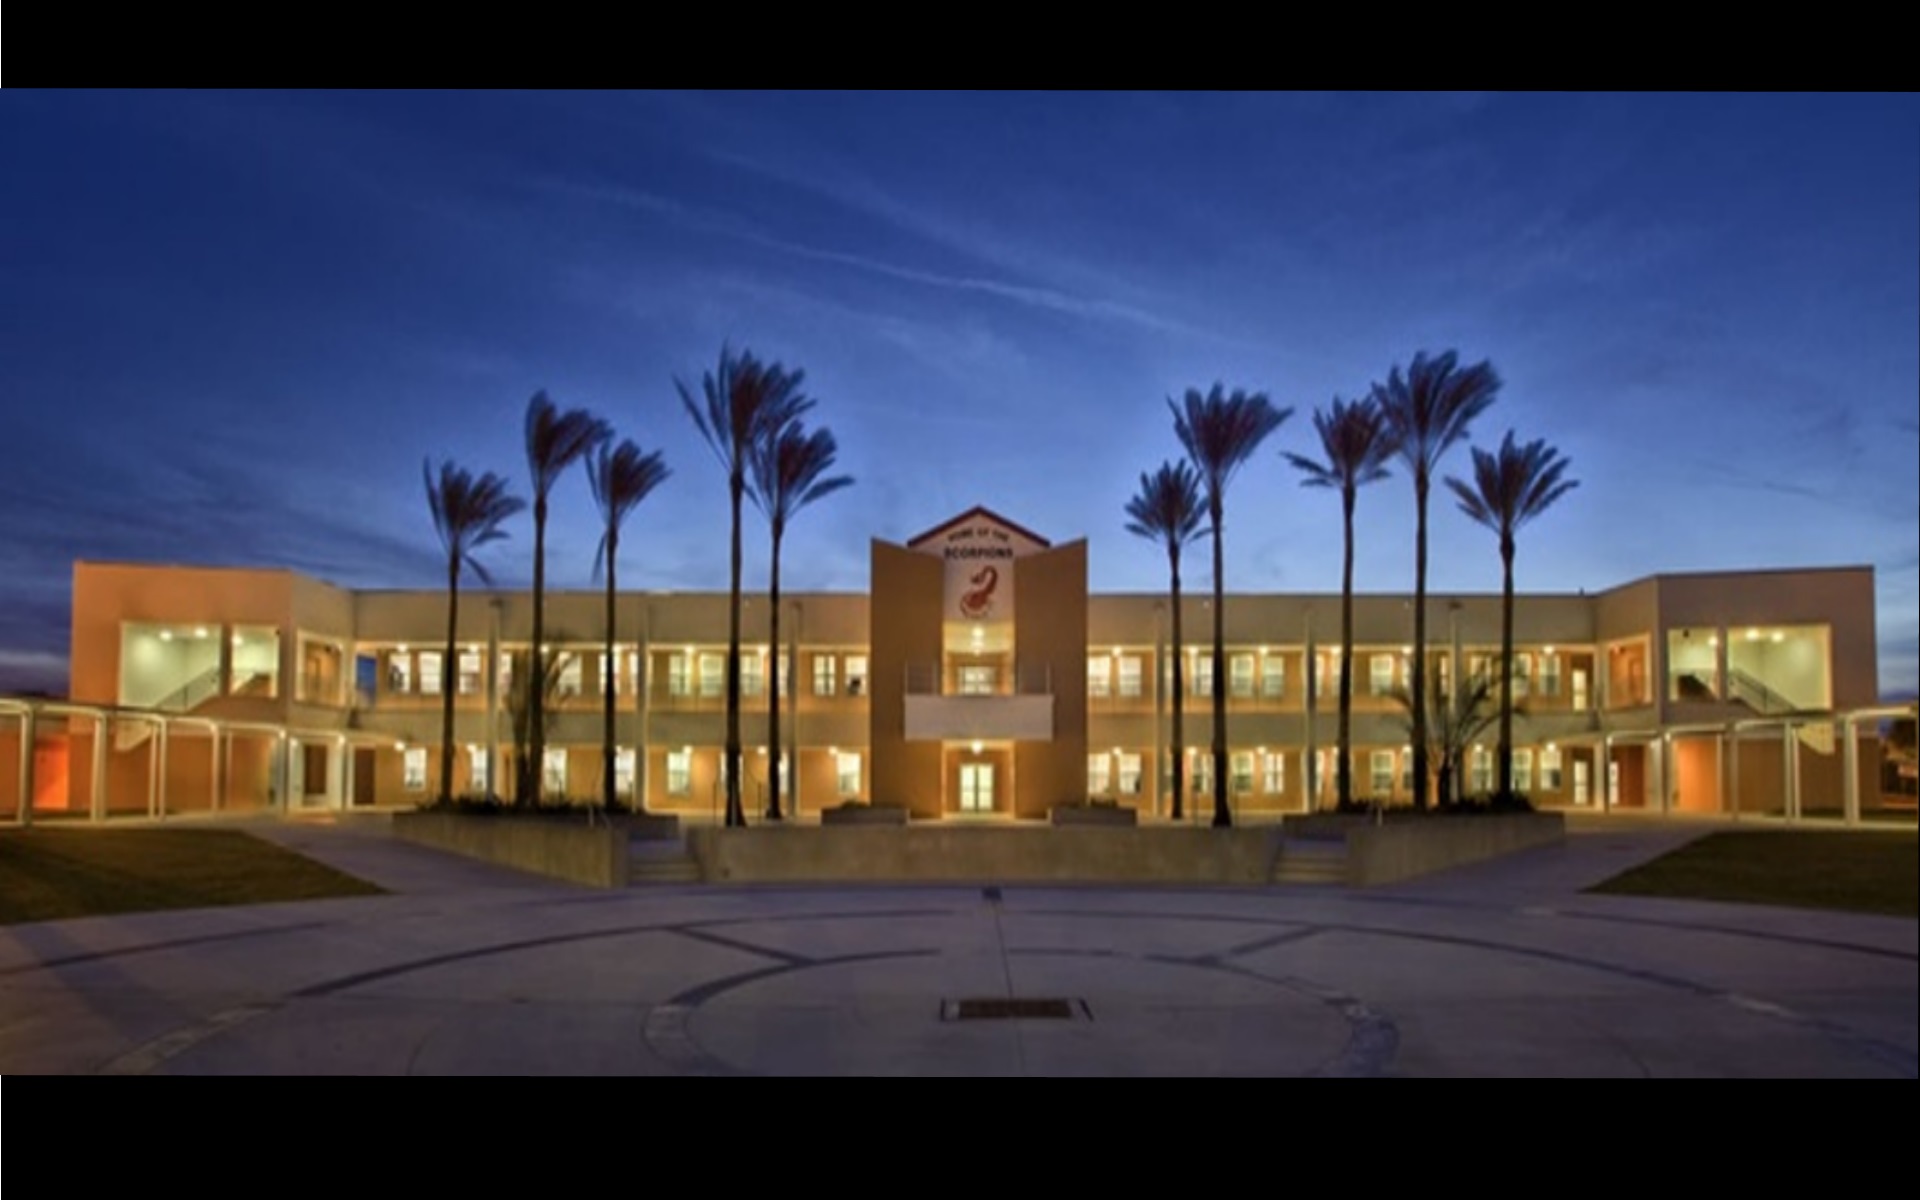 Night time picture of Satellite High School